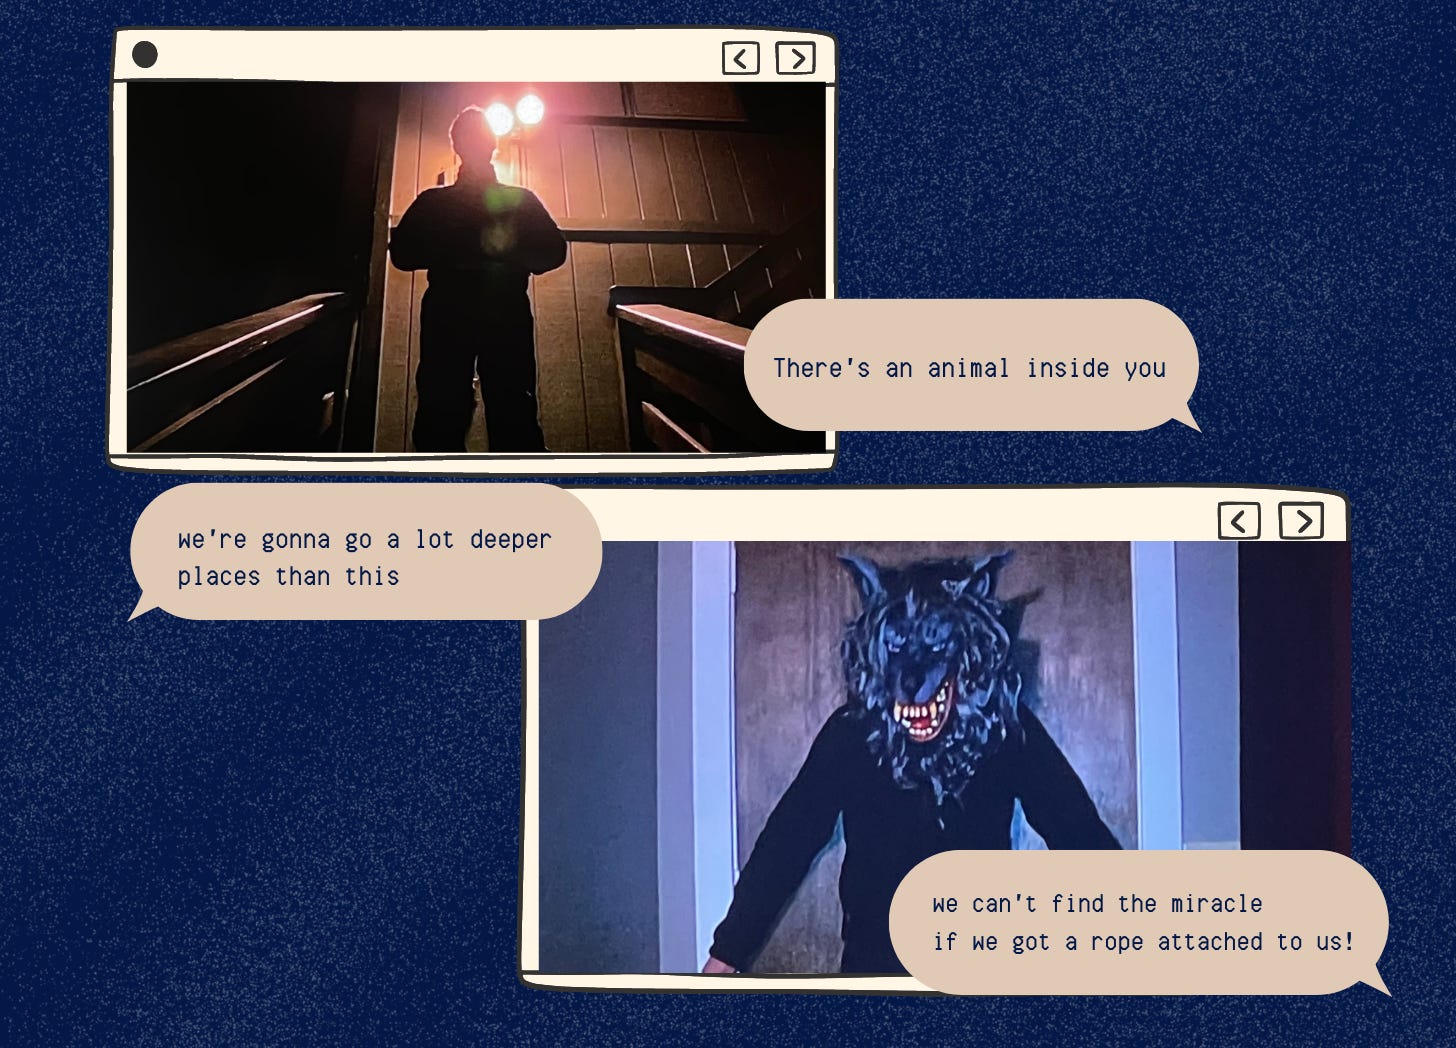 A graphic with a dark blue background, featuring illustrated computer screens with screenshots of the film inside them. The screenshots are of a man standing on top of the steps leading up to a porch, silhouetted by a bright light behind him, and a man in a wolf mask and dark clothing, barring a door. Text messages around the screen read "There's an animal inside you," "We're gonna go a lot deeper places than this," and 'We can't find the miracle if there's a rope attached to us!"